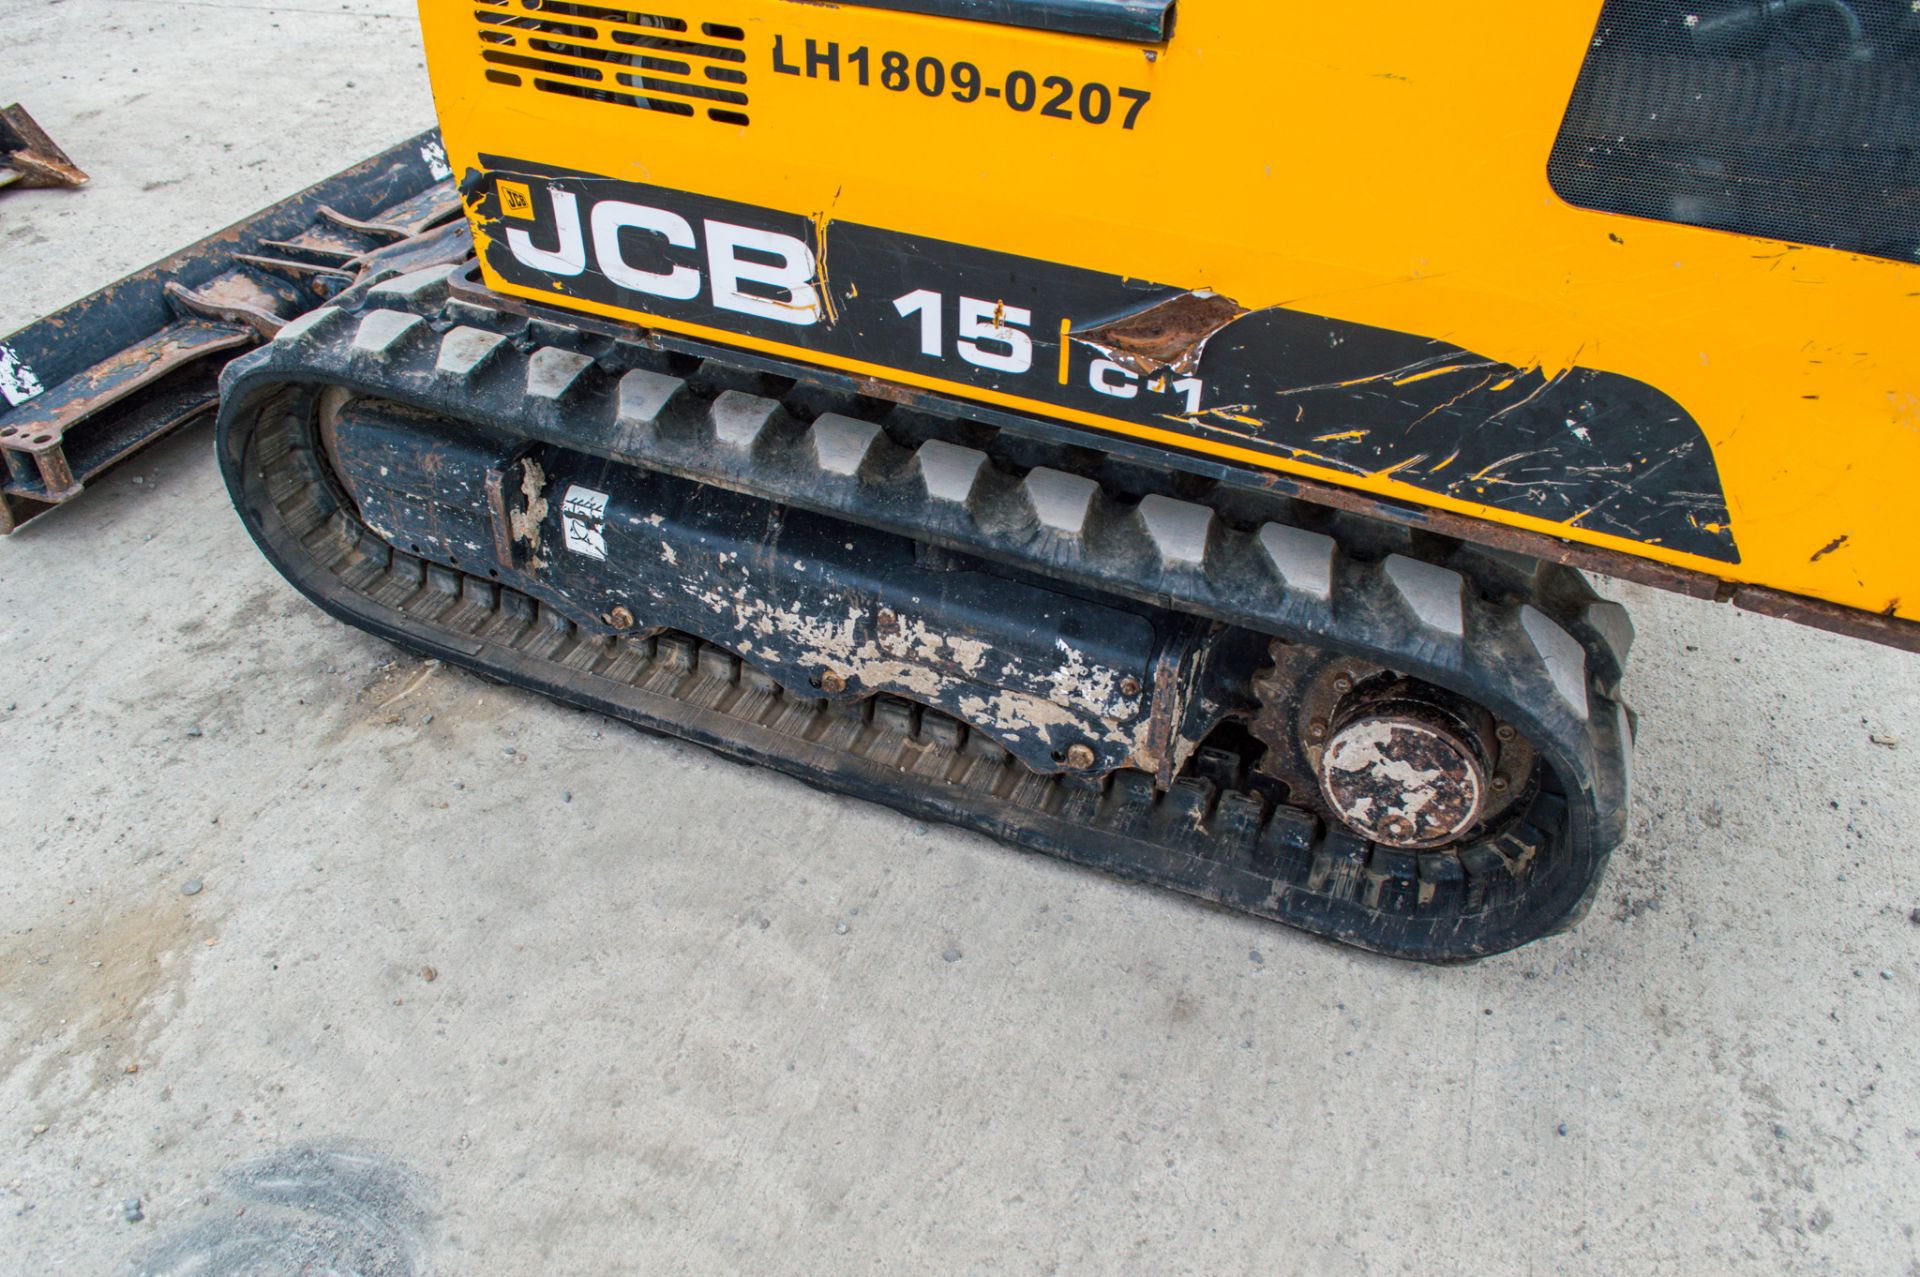 JCB 15 C-1 1.5 tonne rubber tracked mini excavator Year: 2018 S/N: 709999 Recorded Hours: 1180 - Image 10 of 21